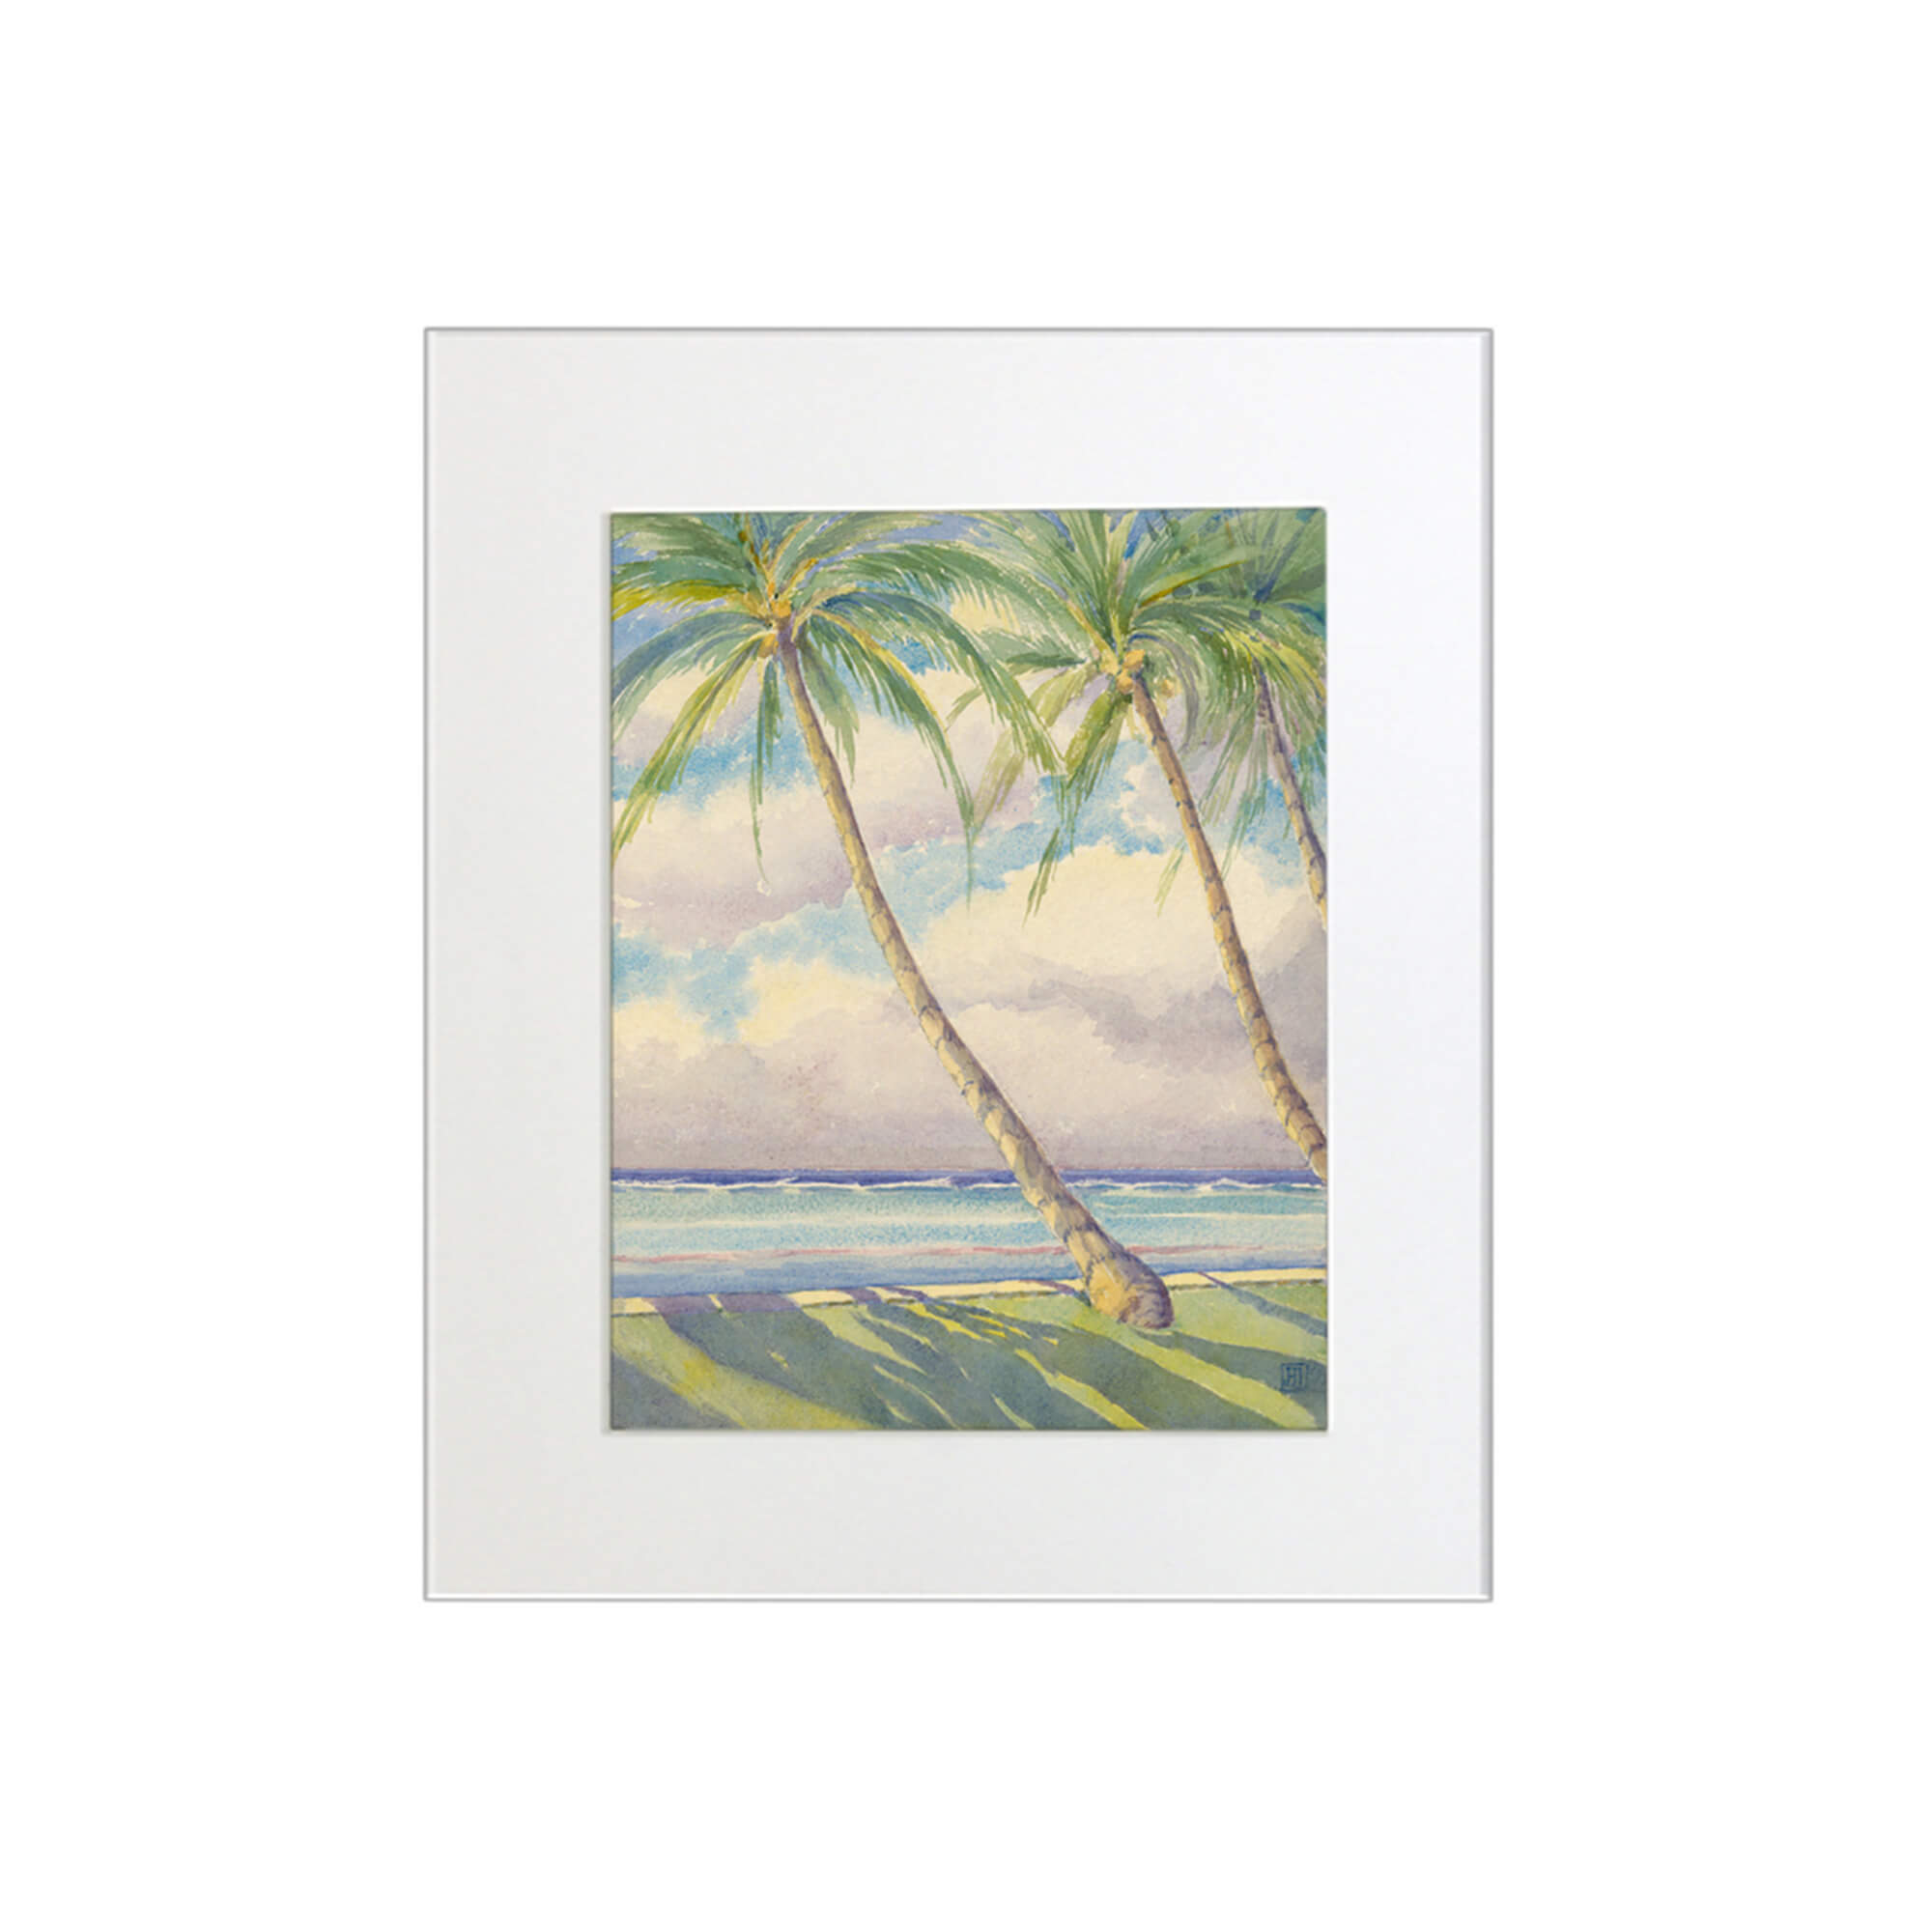 A tropical scenery in pastel colors